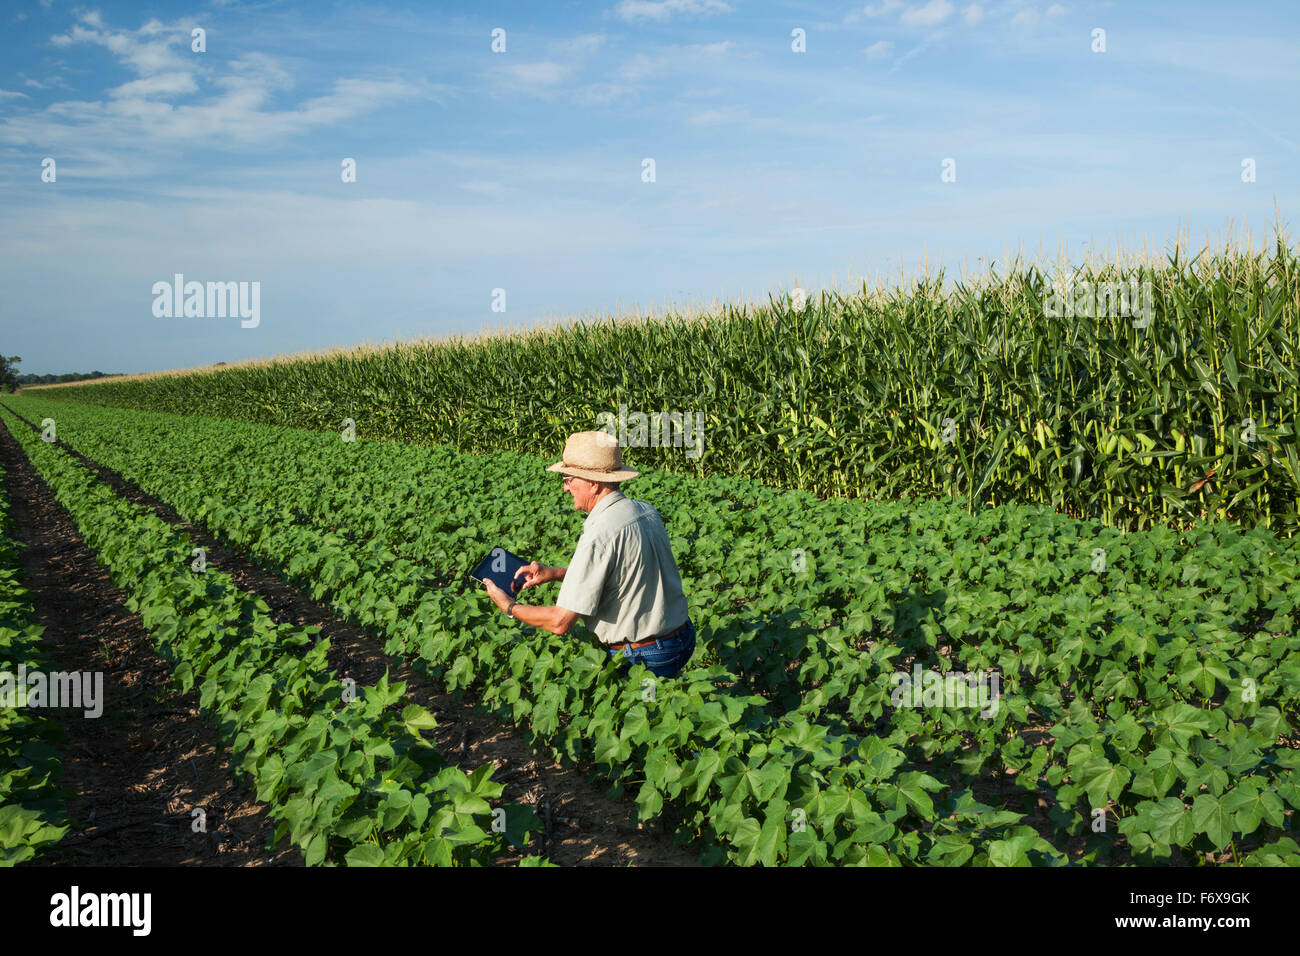 Crop consultant uses tablet to make notes of his observations while checking field of no till cotton in peak fruit development stage Stock Photo